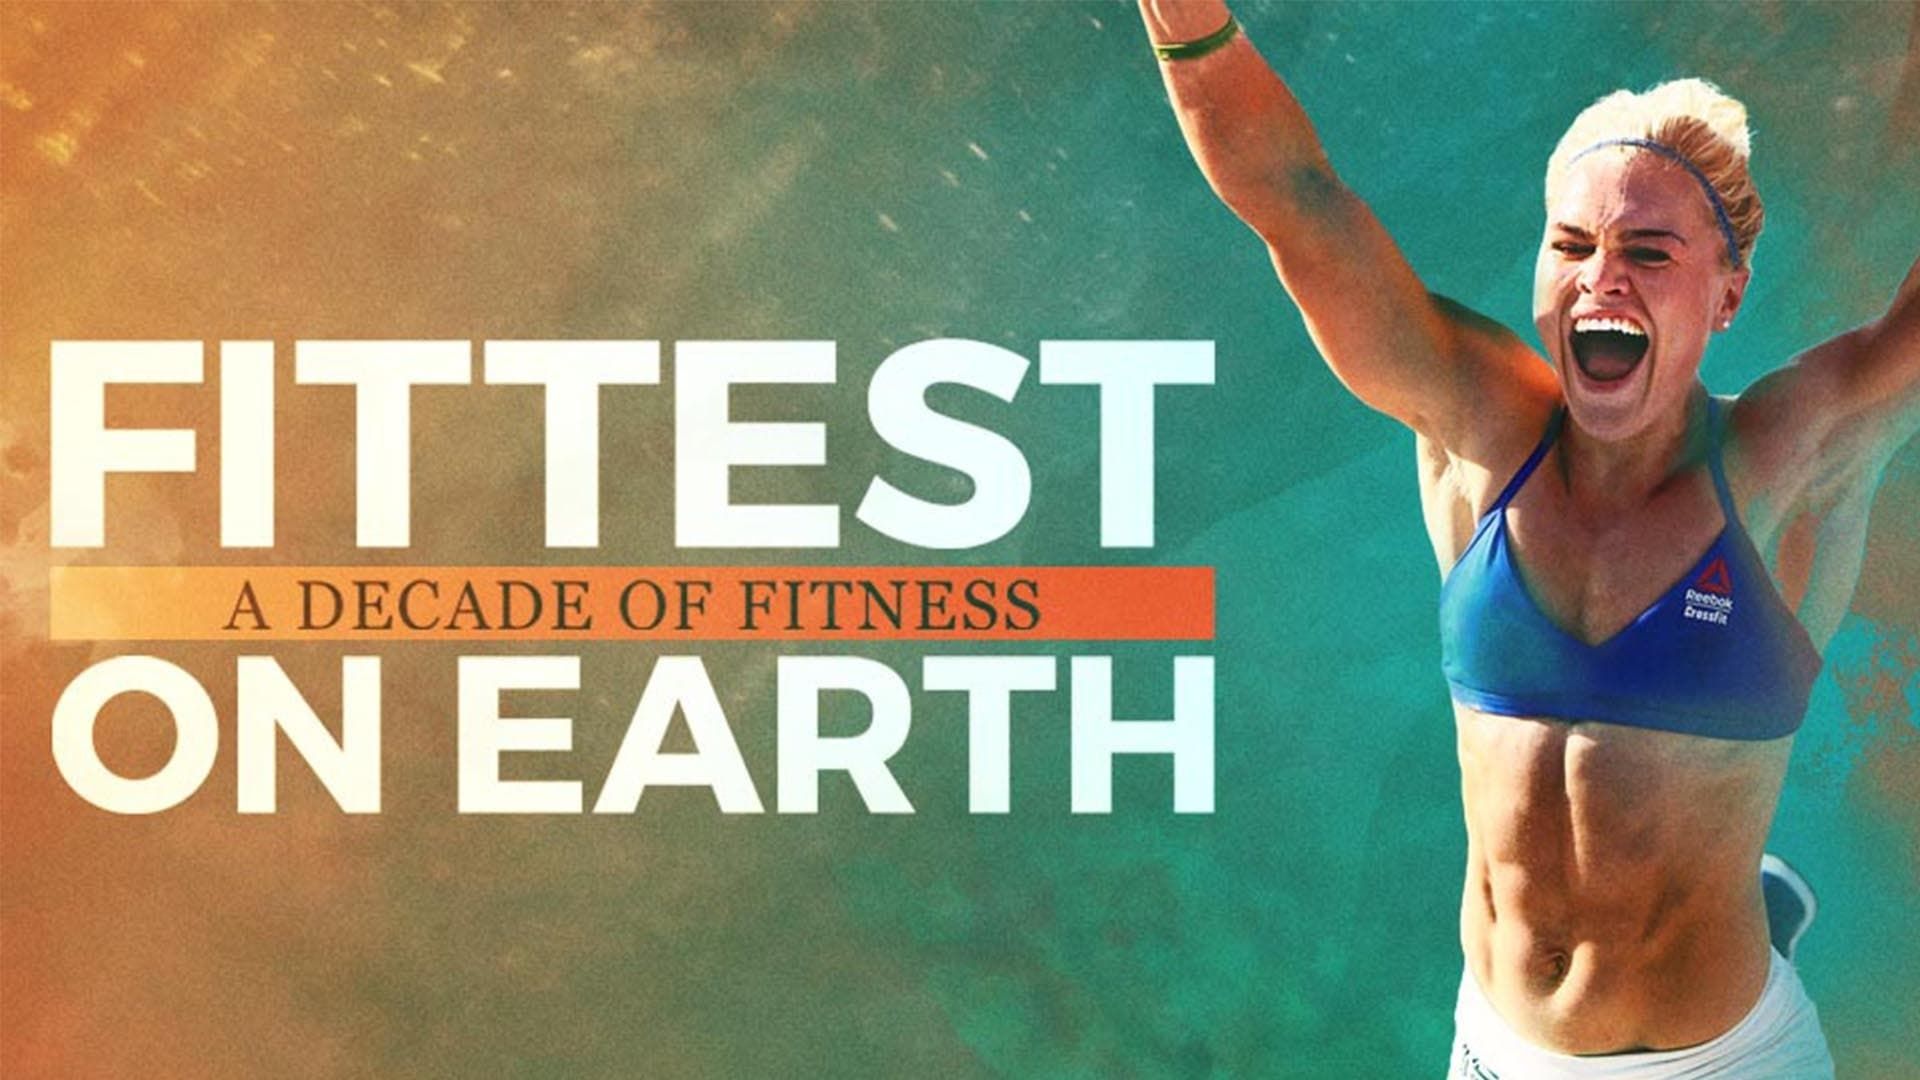 Fittest on Earth: A Decade of Fitness background